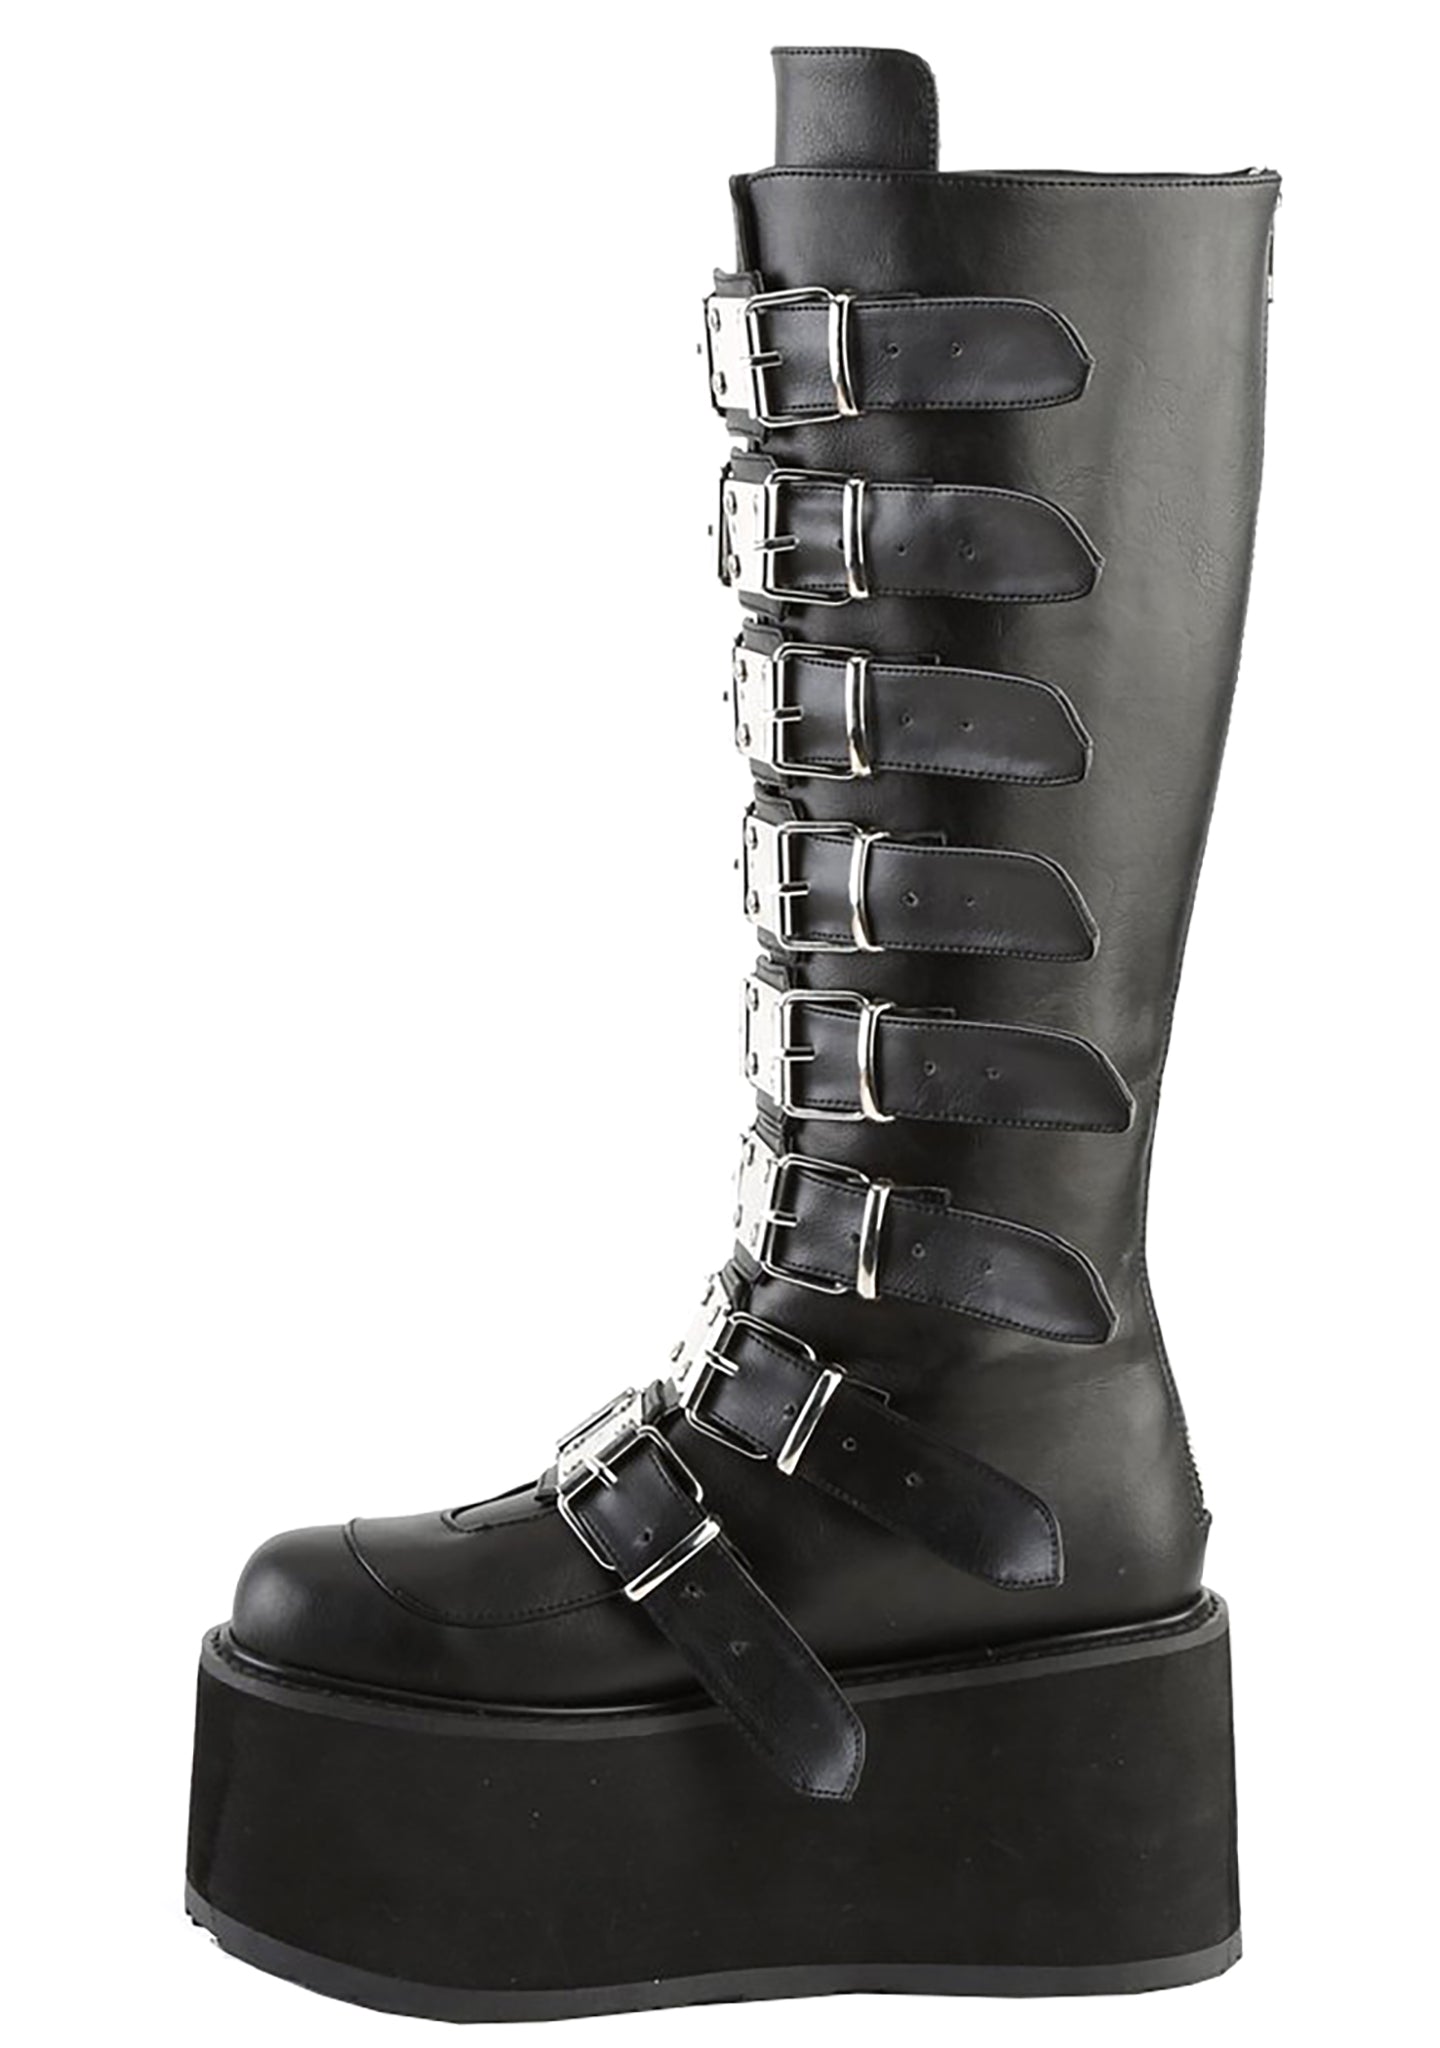 DEMONIA | Shop Demonia Obsession Multi Strapped Platform Boots at ...